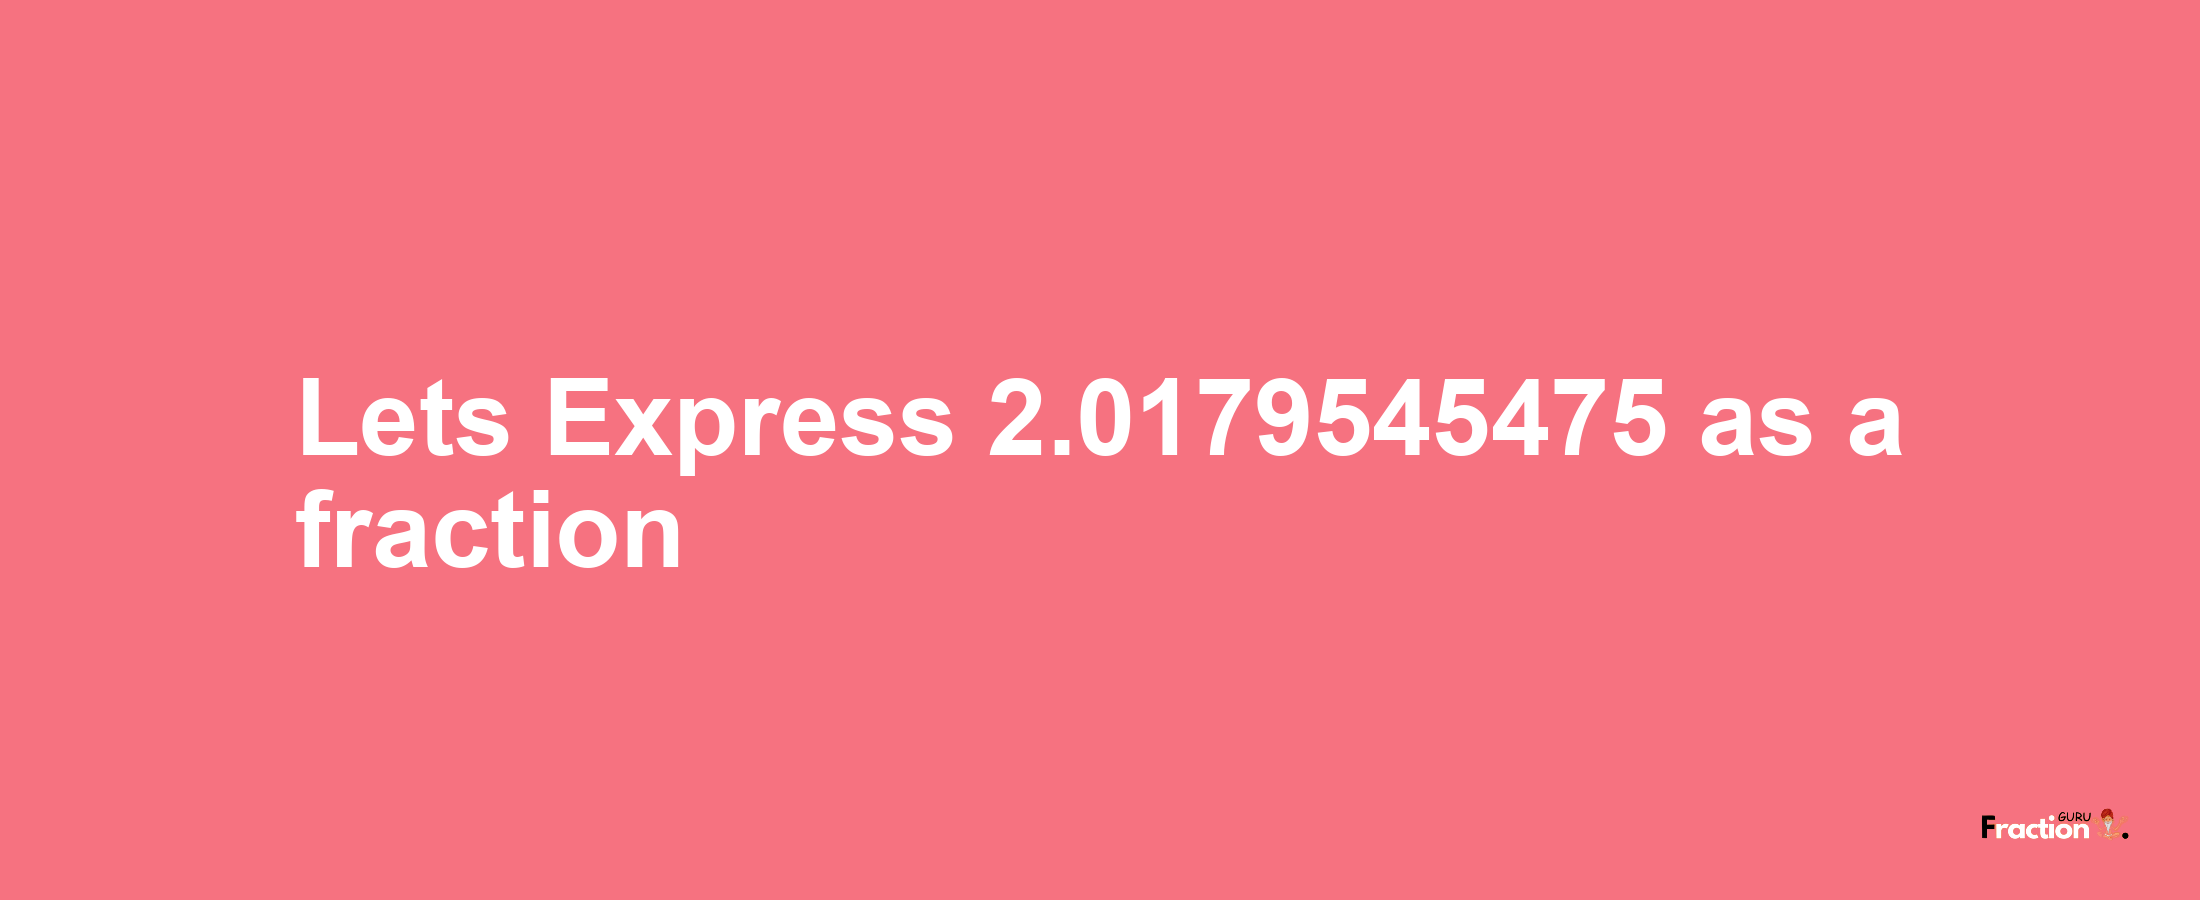 Lets Express 2.0179545475 as afraction